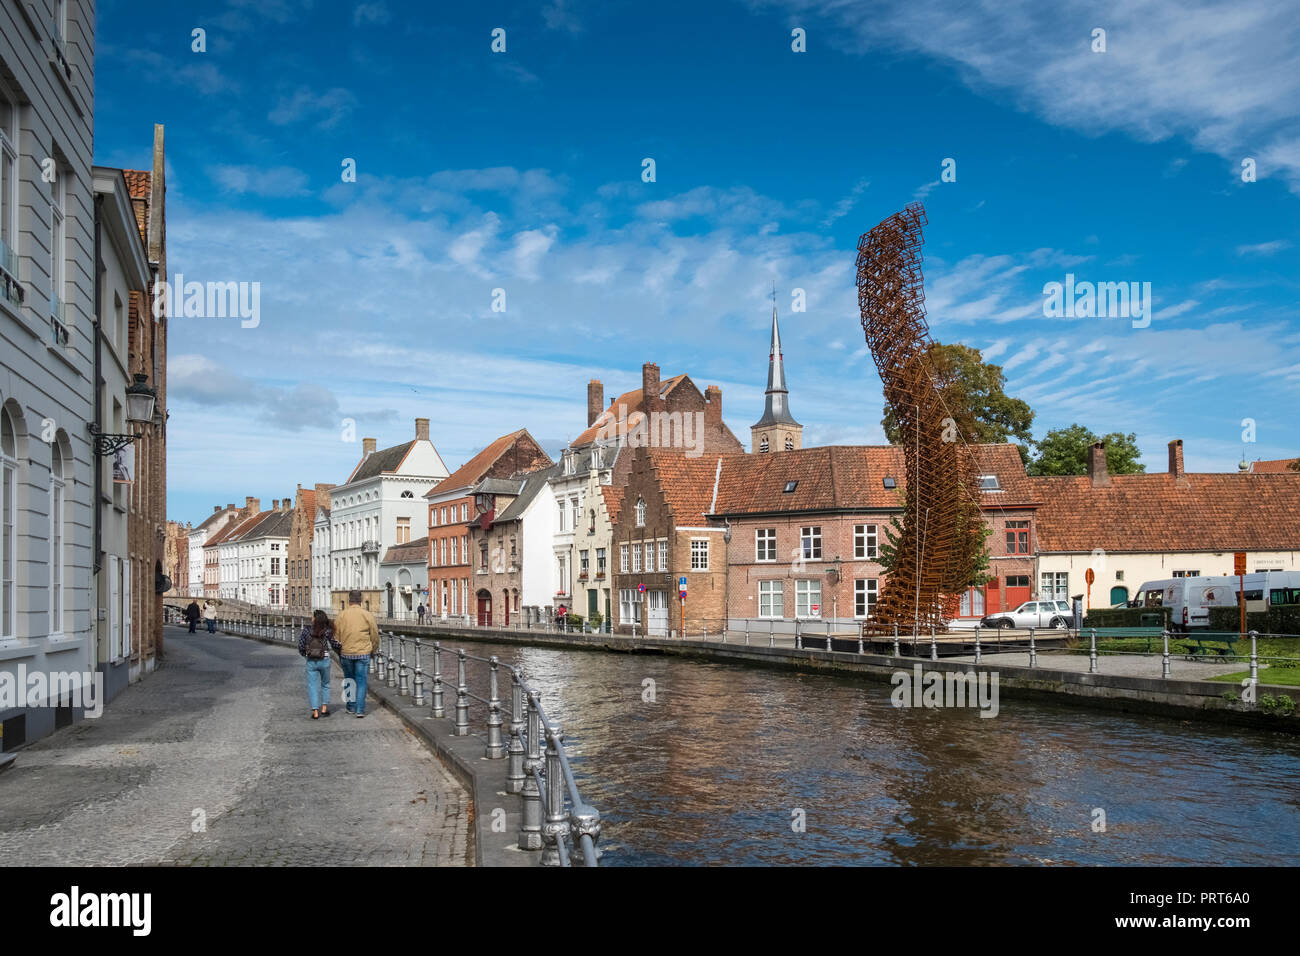 Modern metal street art displayed alongside a canal with traditional architecture in the medieval city of Bruges, West Flanders, Belgium. Stock Photo